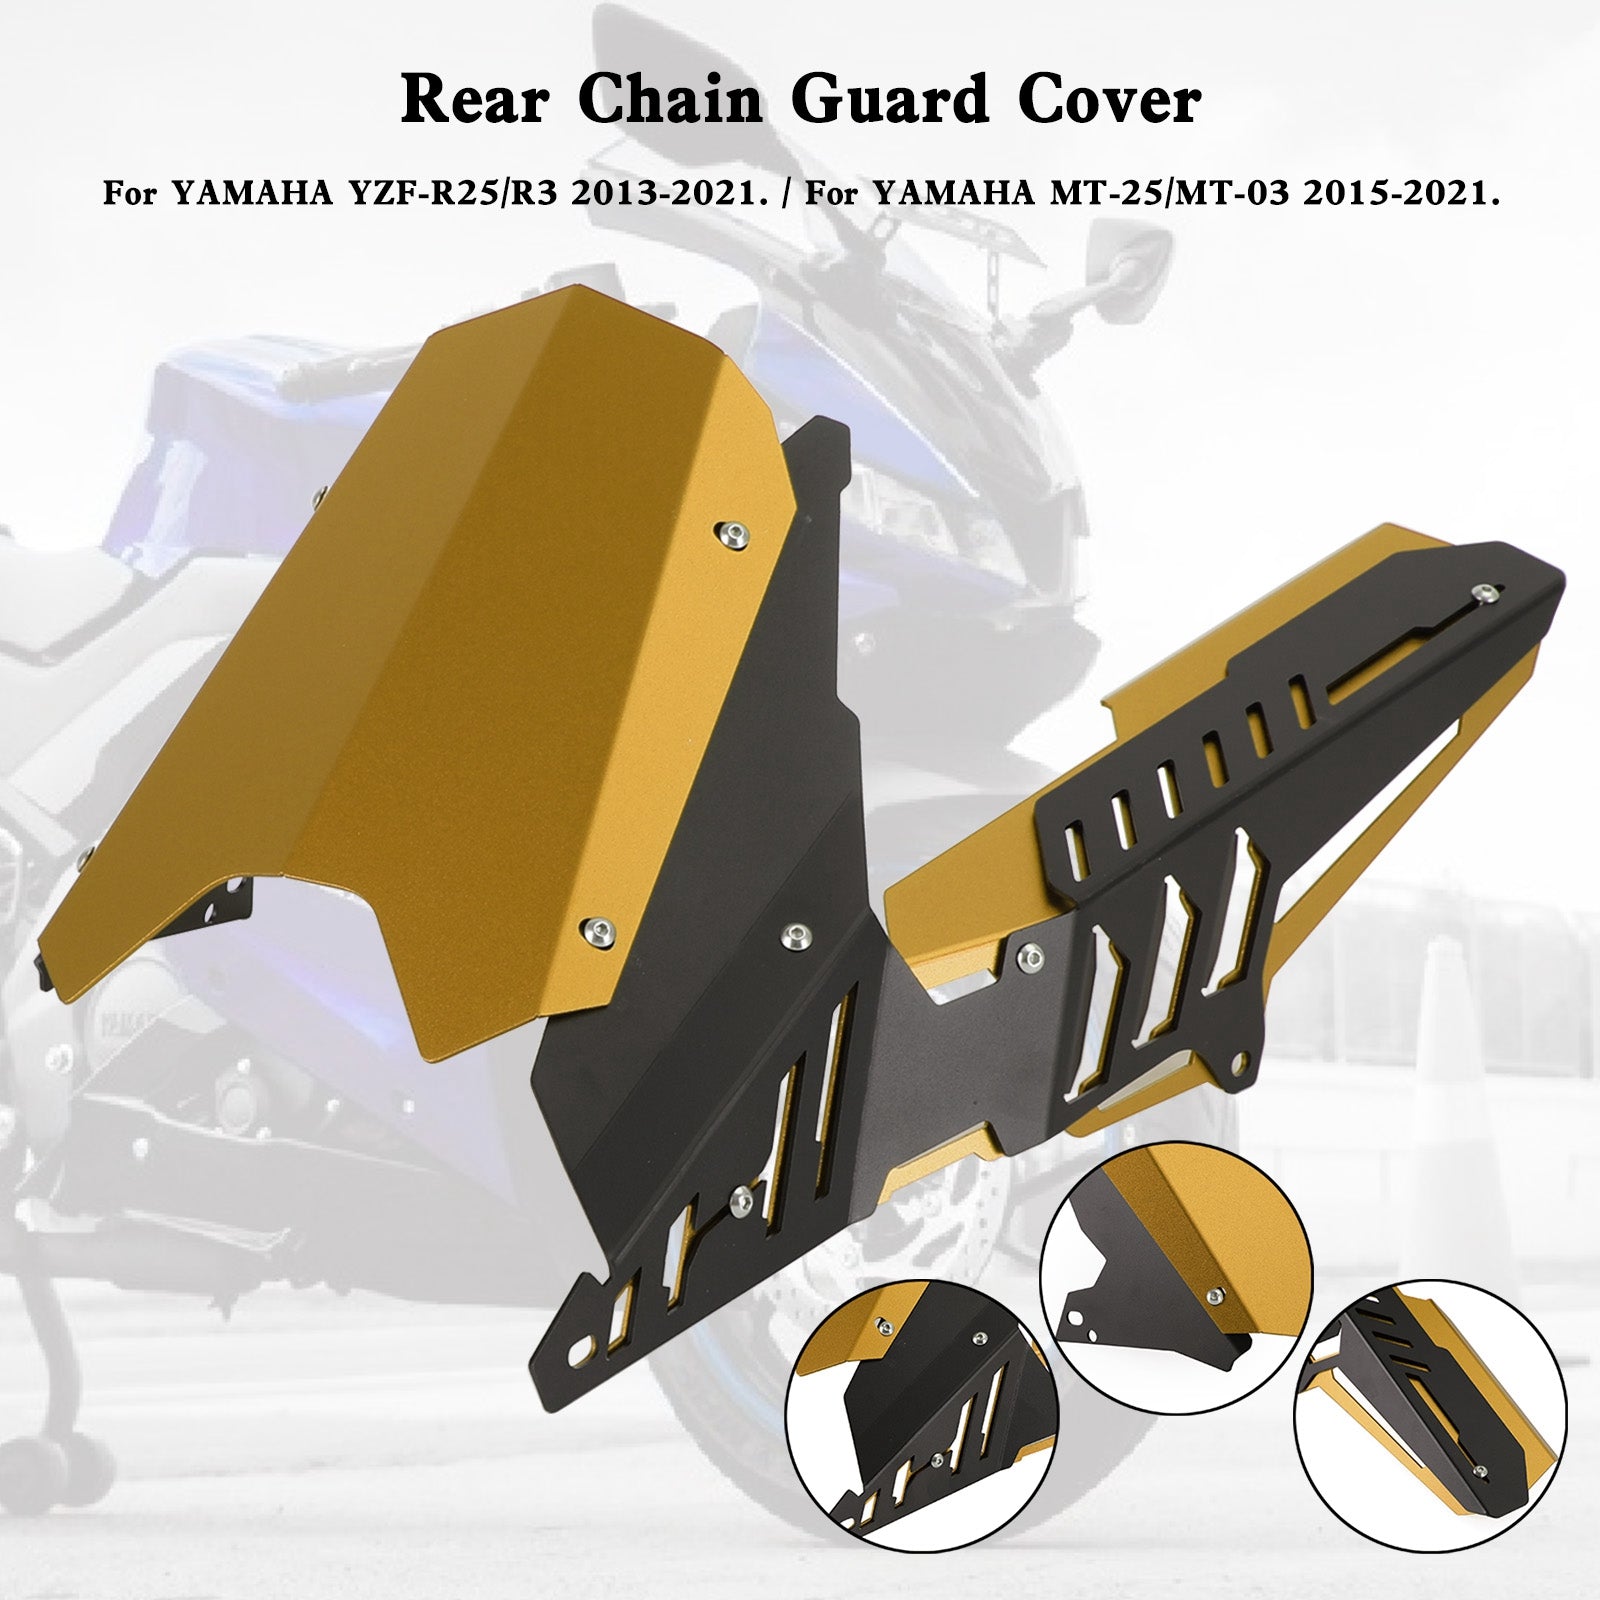 Rear Sprocket Chain Guard Cover For YAMAHA YZF R25 R3 MT-25 MT-03 13-21 Generic